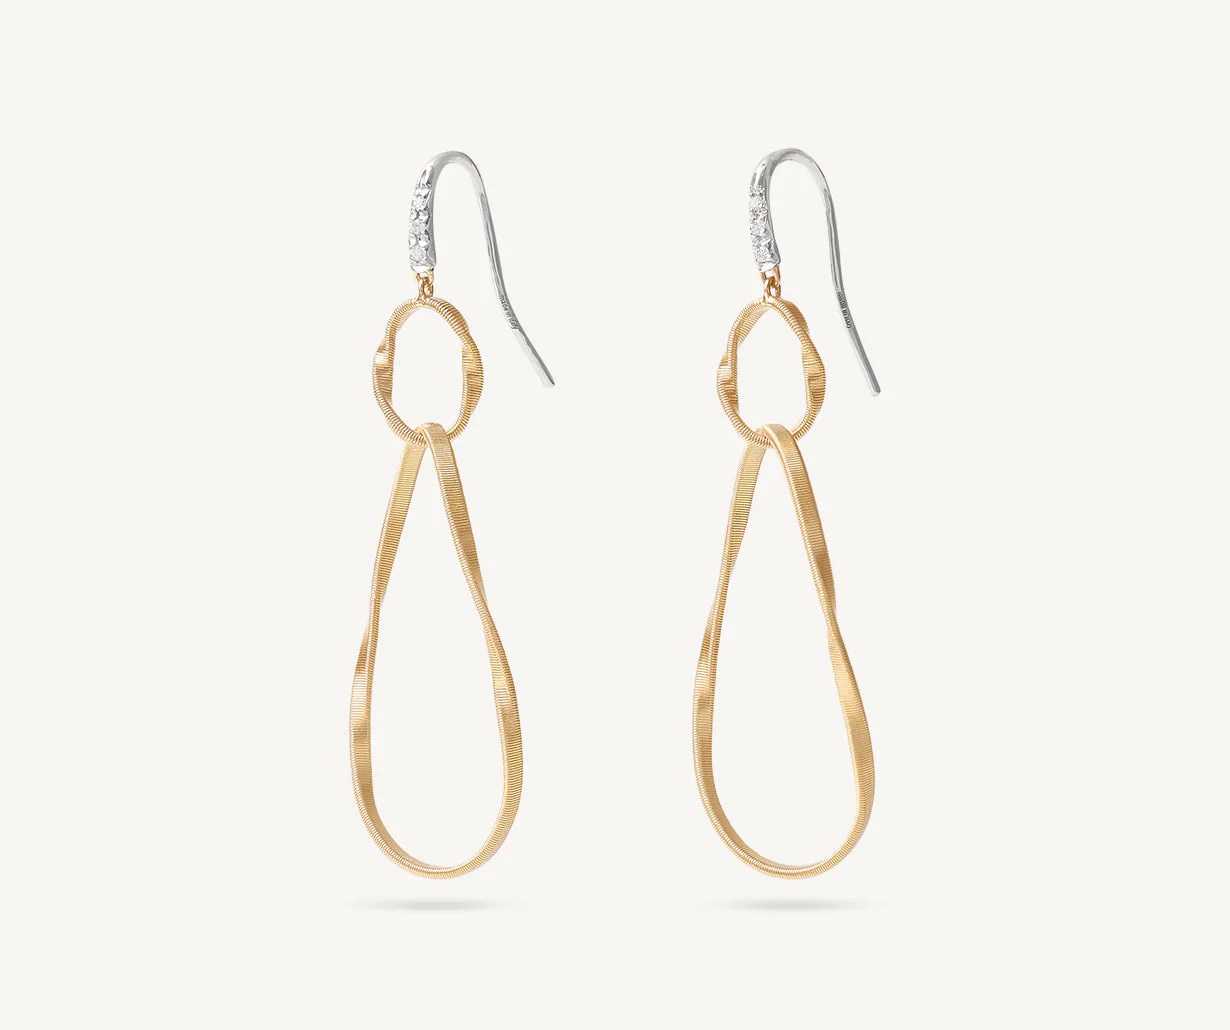 Yellow gold and white gold with diamonds hoop earrings handmade in Italy by Marco Bicego 